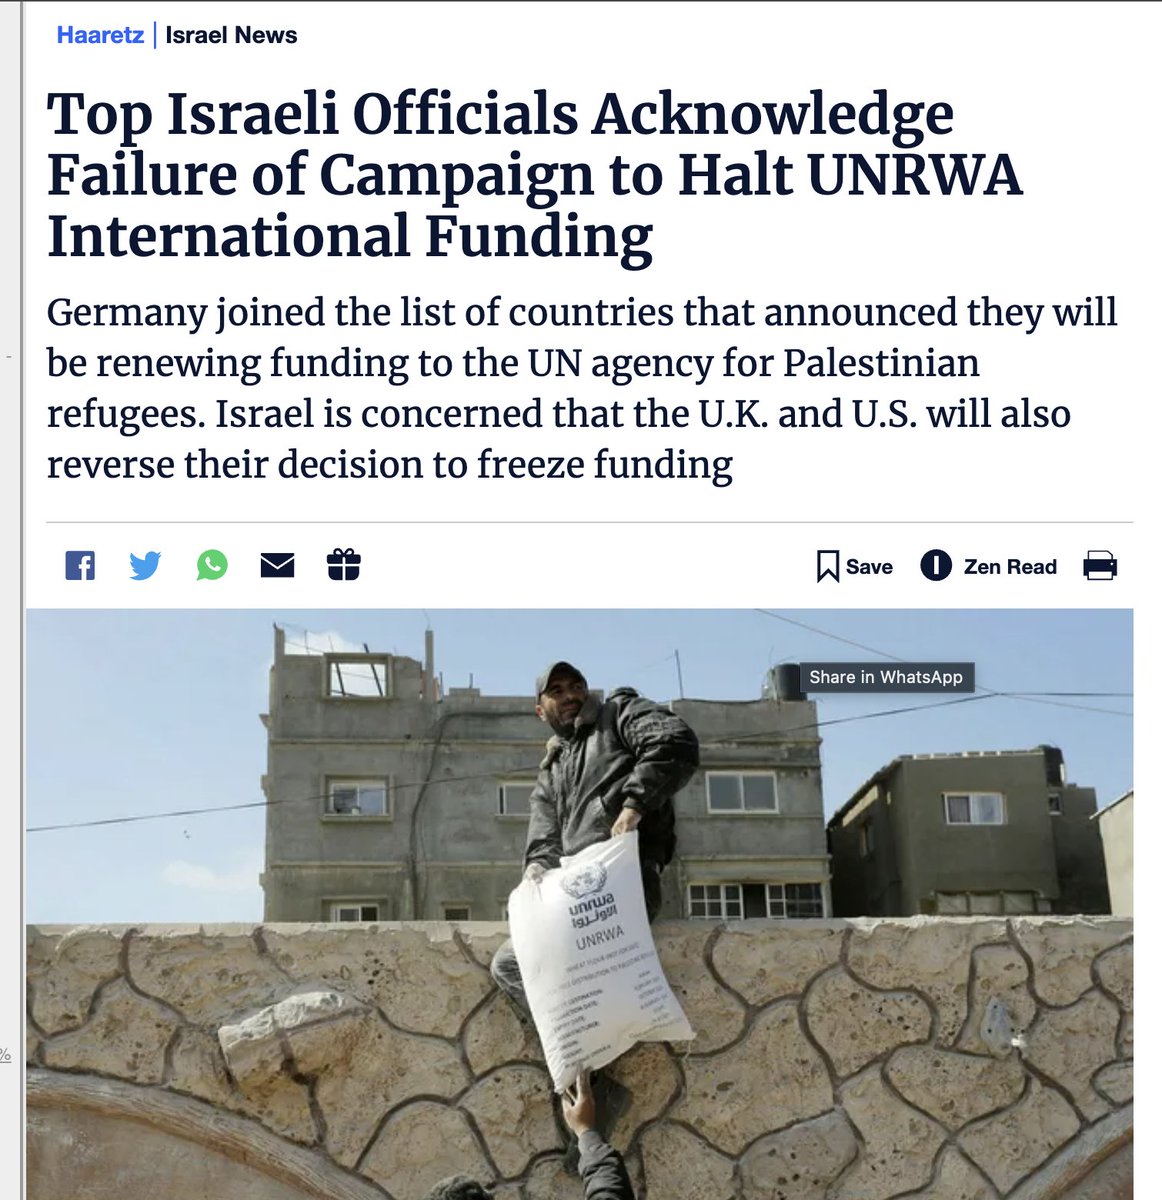 Good news to start the day: Senior Israeli officials admit their campaign to smear & disband UNRWA has failed miserably. Thanks to everyone who challenged & debunked their deranged & shameless lies & pushed back against their complicit partners in the EU/US.